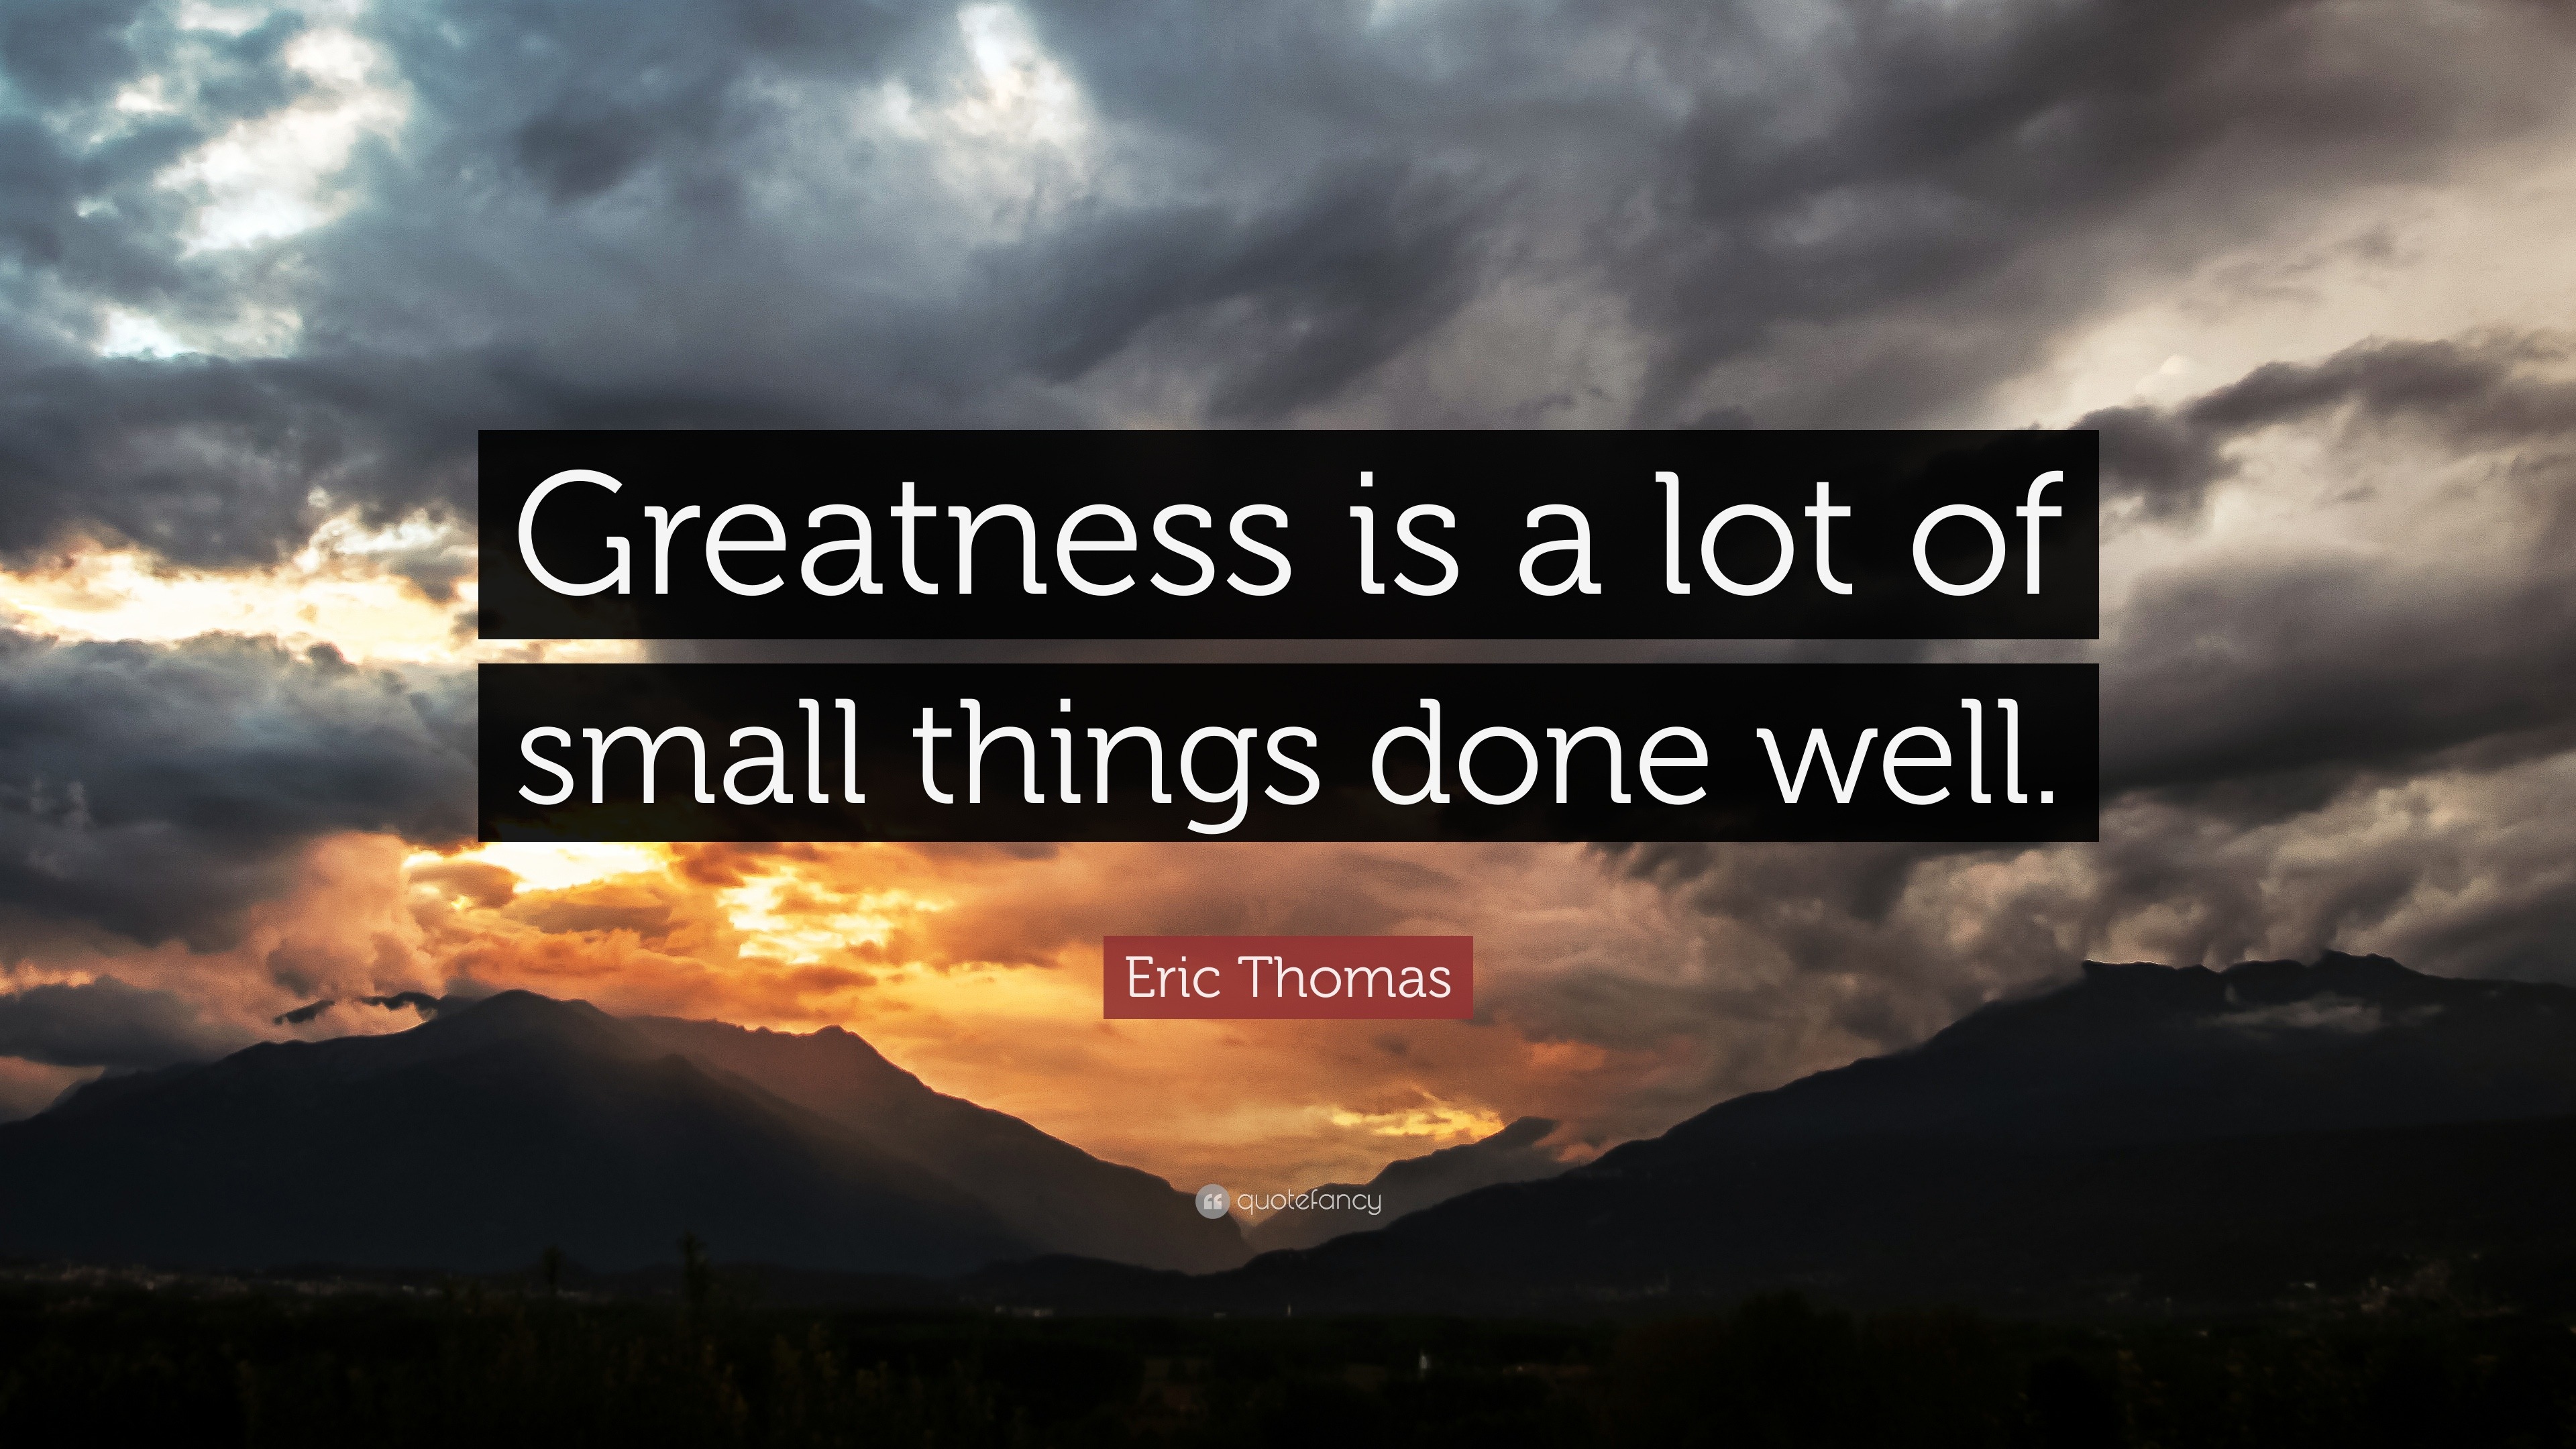 Eric Thomas Quote “Greatness is a lot of small things done well ”